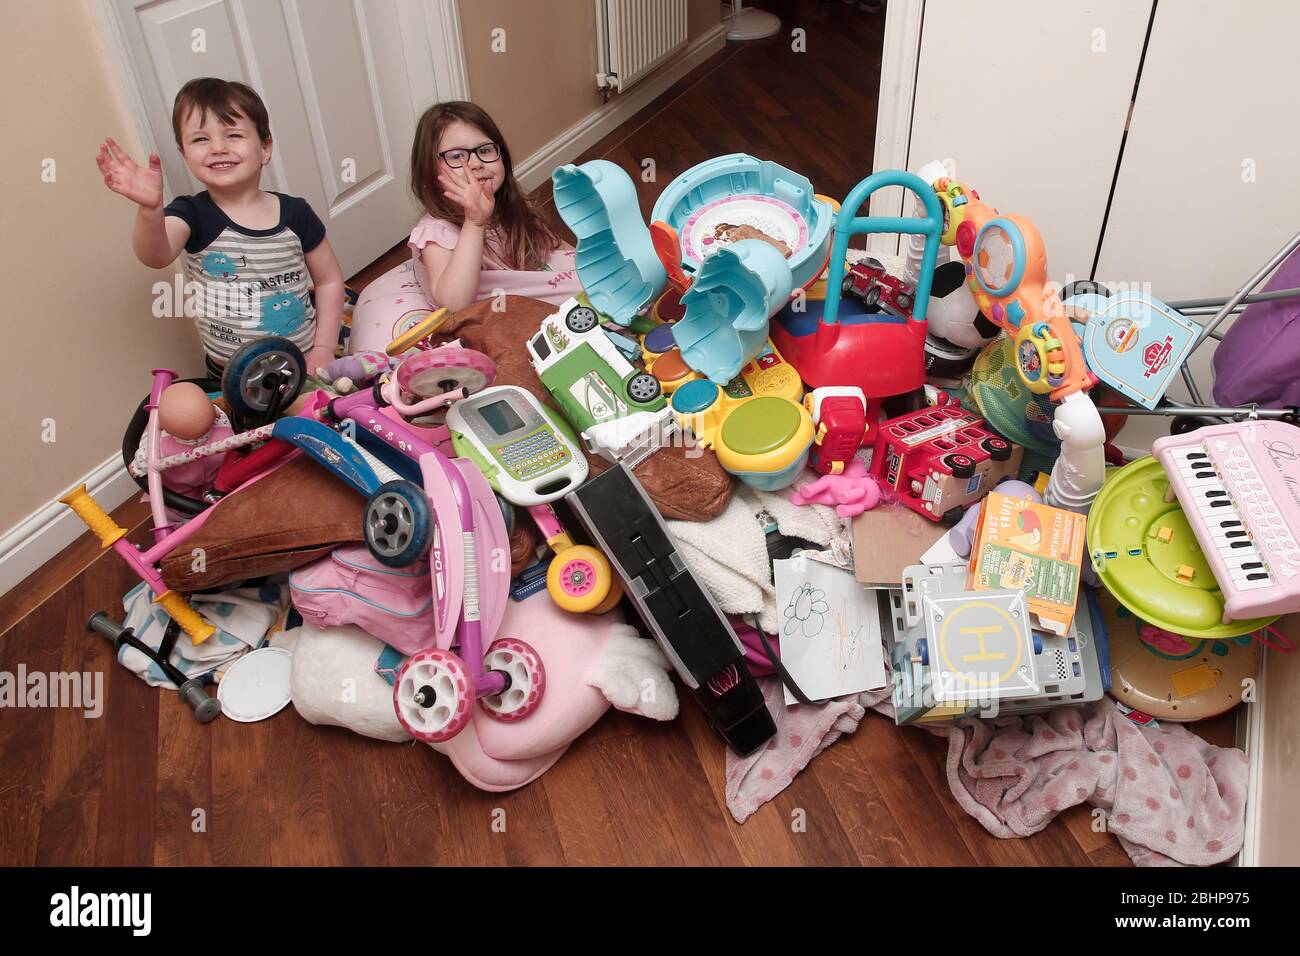 Two siblings surrounded by huge pile of children's toys at home Stock Photo